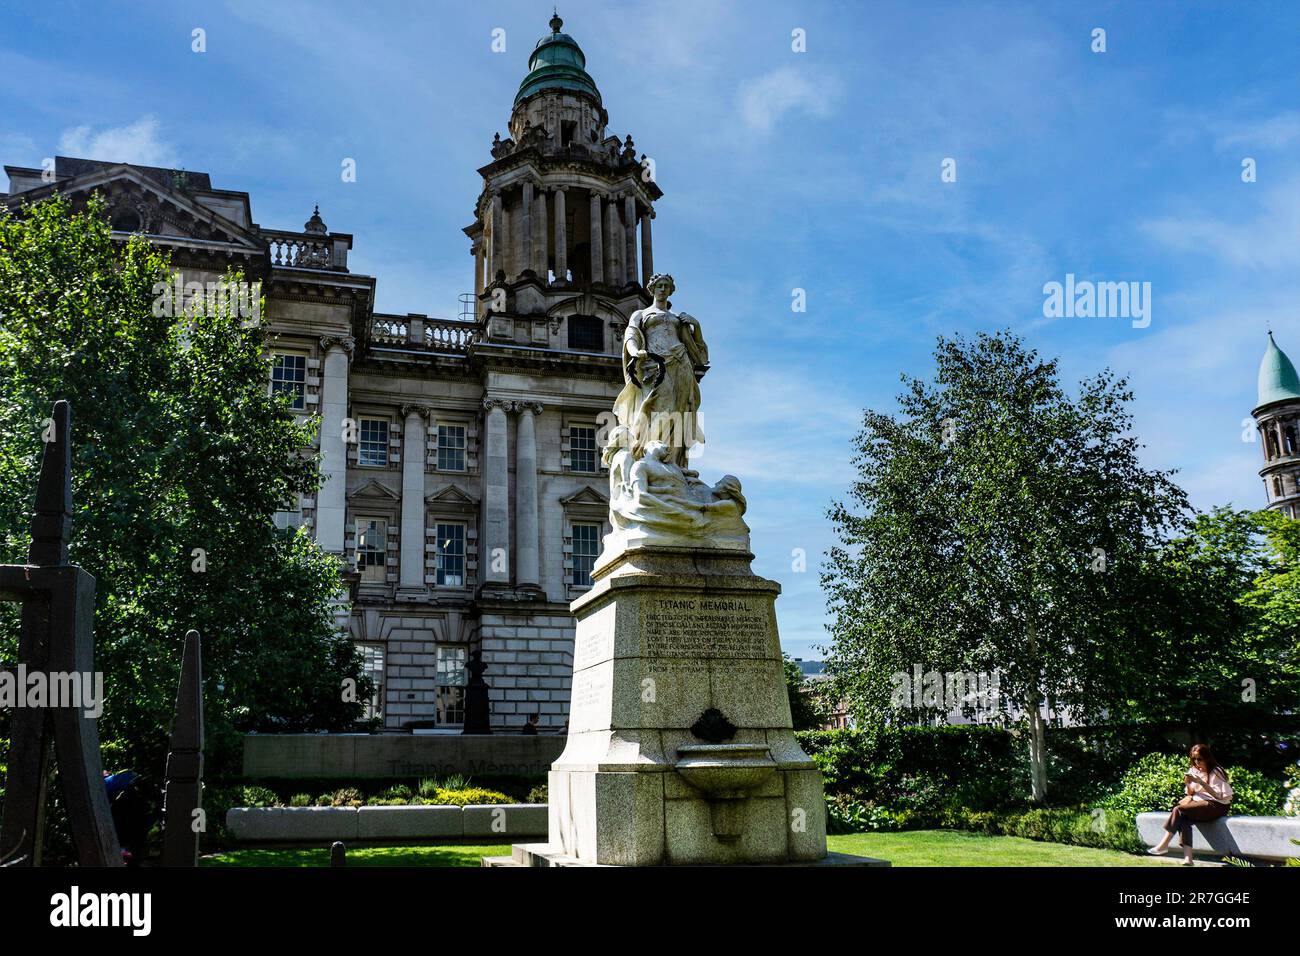 The Titanic Memorial in Donegal Square outside Belfast City Hall commemorating the lives lost in the sinking of the RMS Titanic on 15 April 1912 Stock Photo